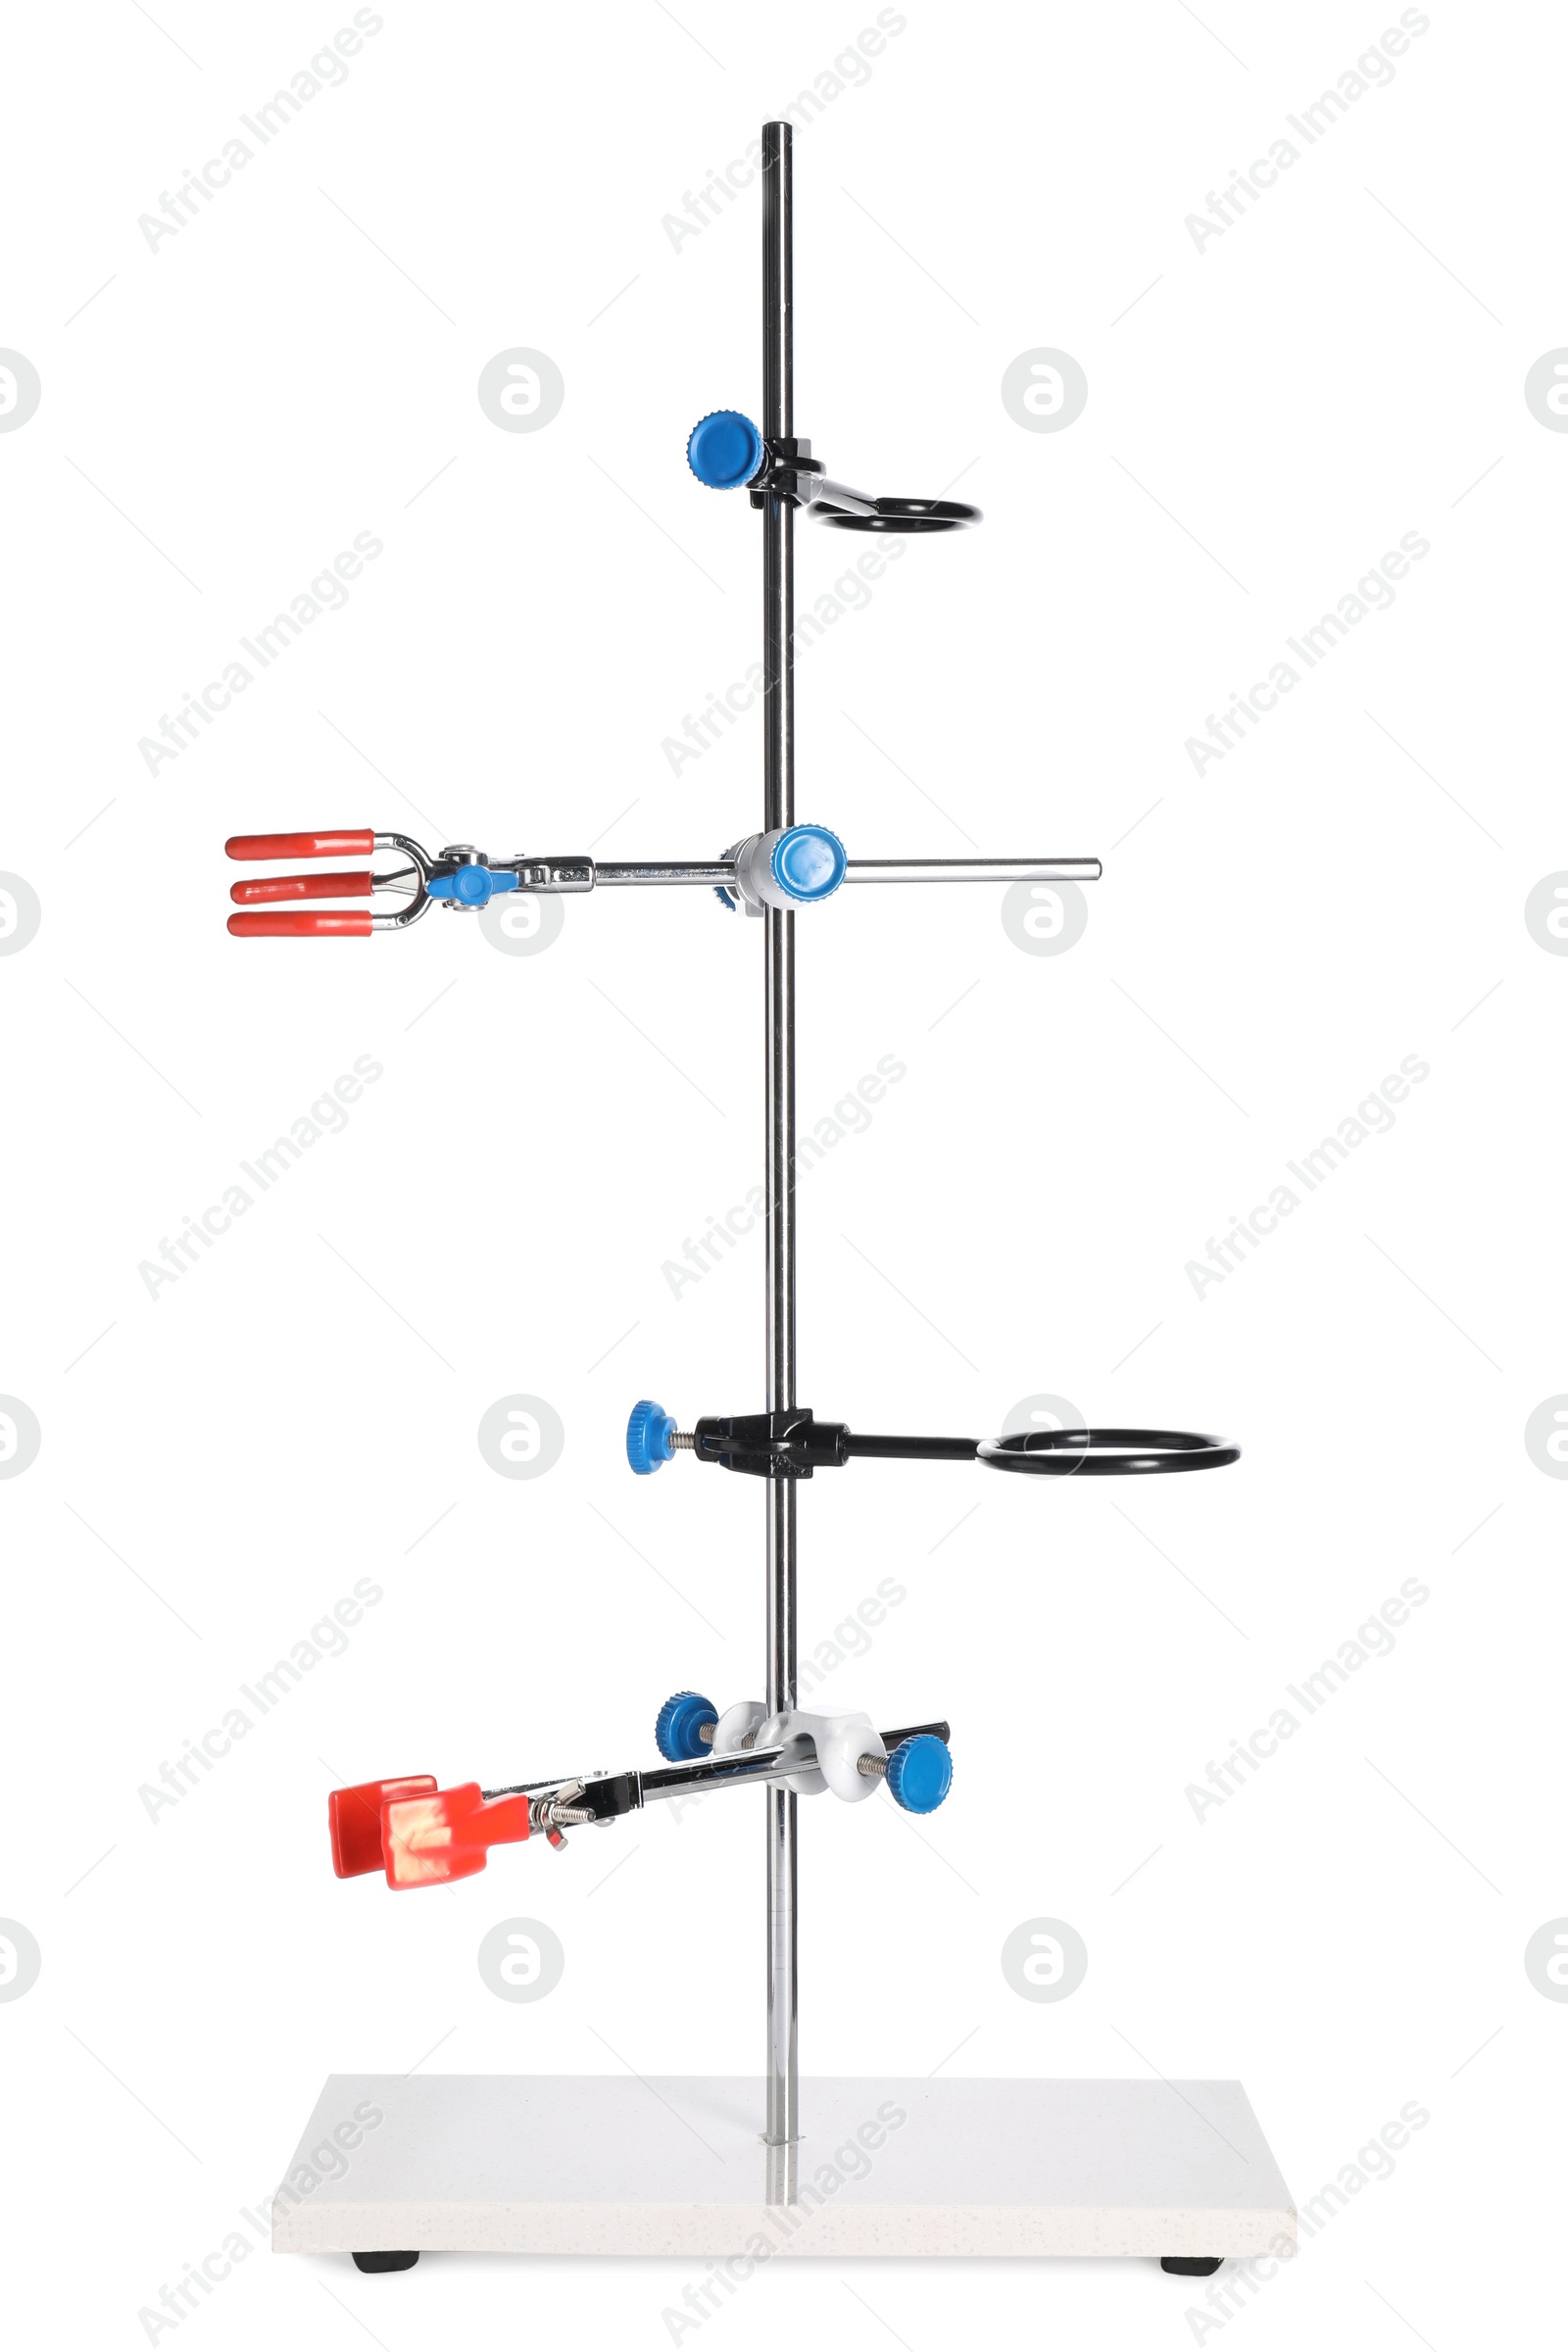 Photo of Retort stand with many clamps isolated on white